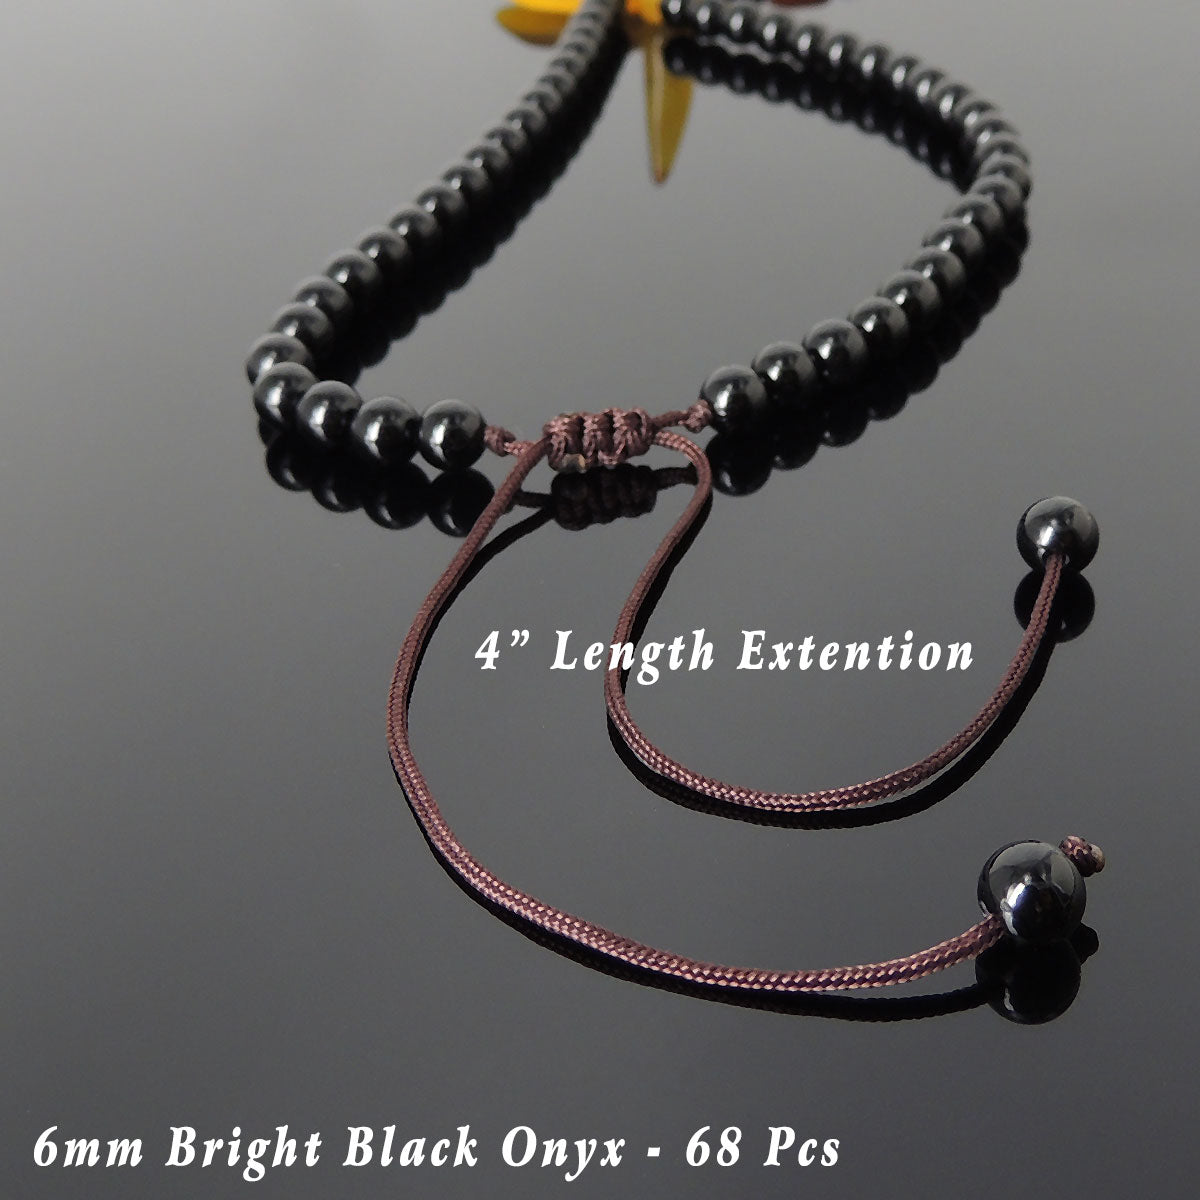 Adjustable Braided Necklace with Agate Wolf Tooth Pendants - Handmade by Gem & Silver NK203